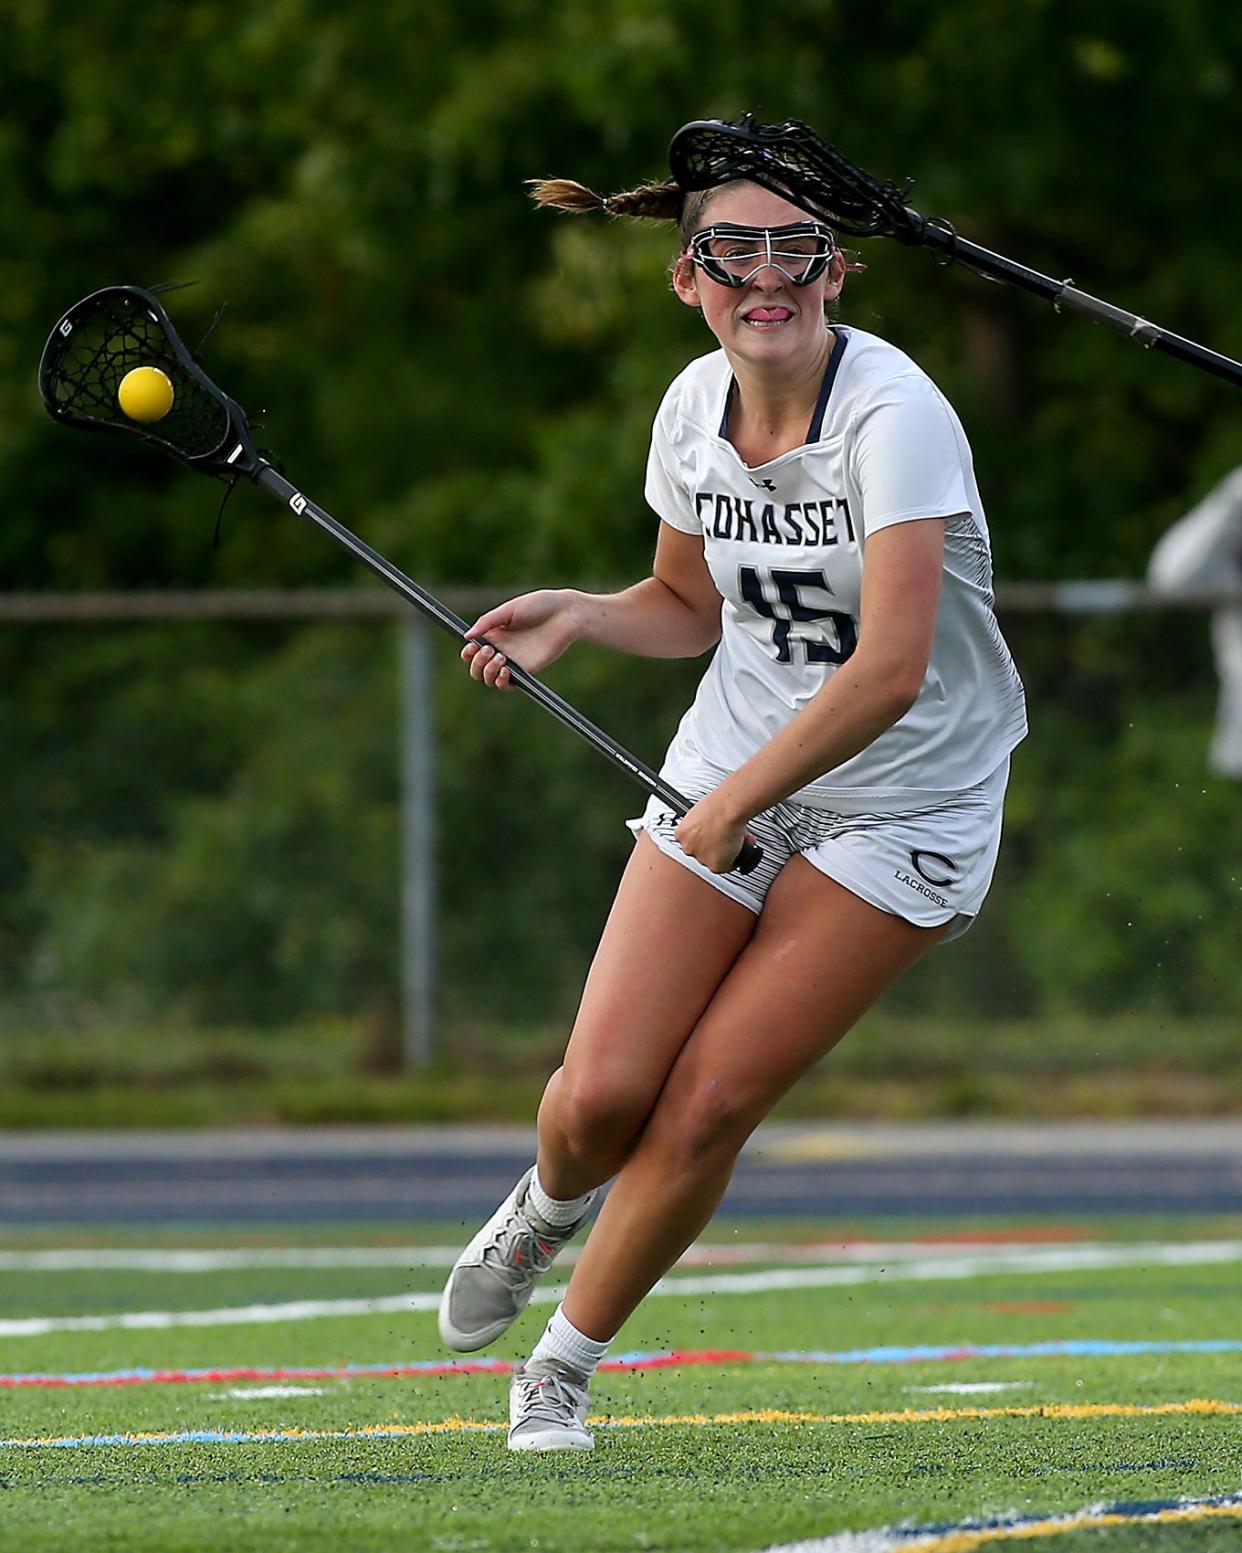 Cohasset's Laney Larsen looks to go on the attack during second half action of their game against Norwell in the Division 3 Elite 8 game at Cohasset High School on Friday, June 9, 2023. Norwell would win in OT 9-8.